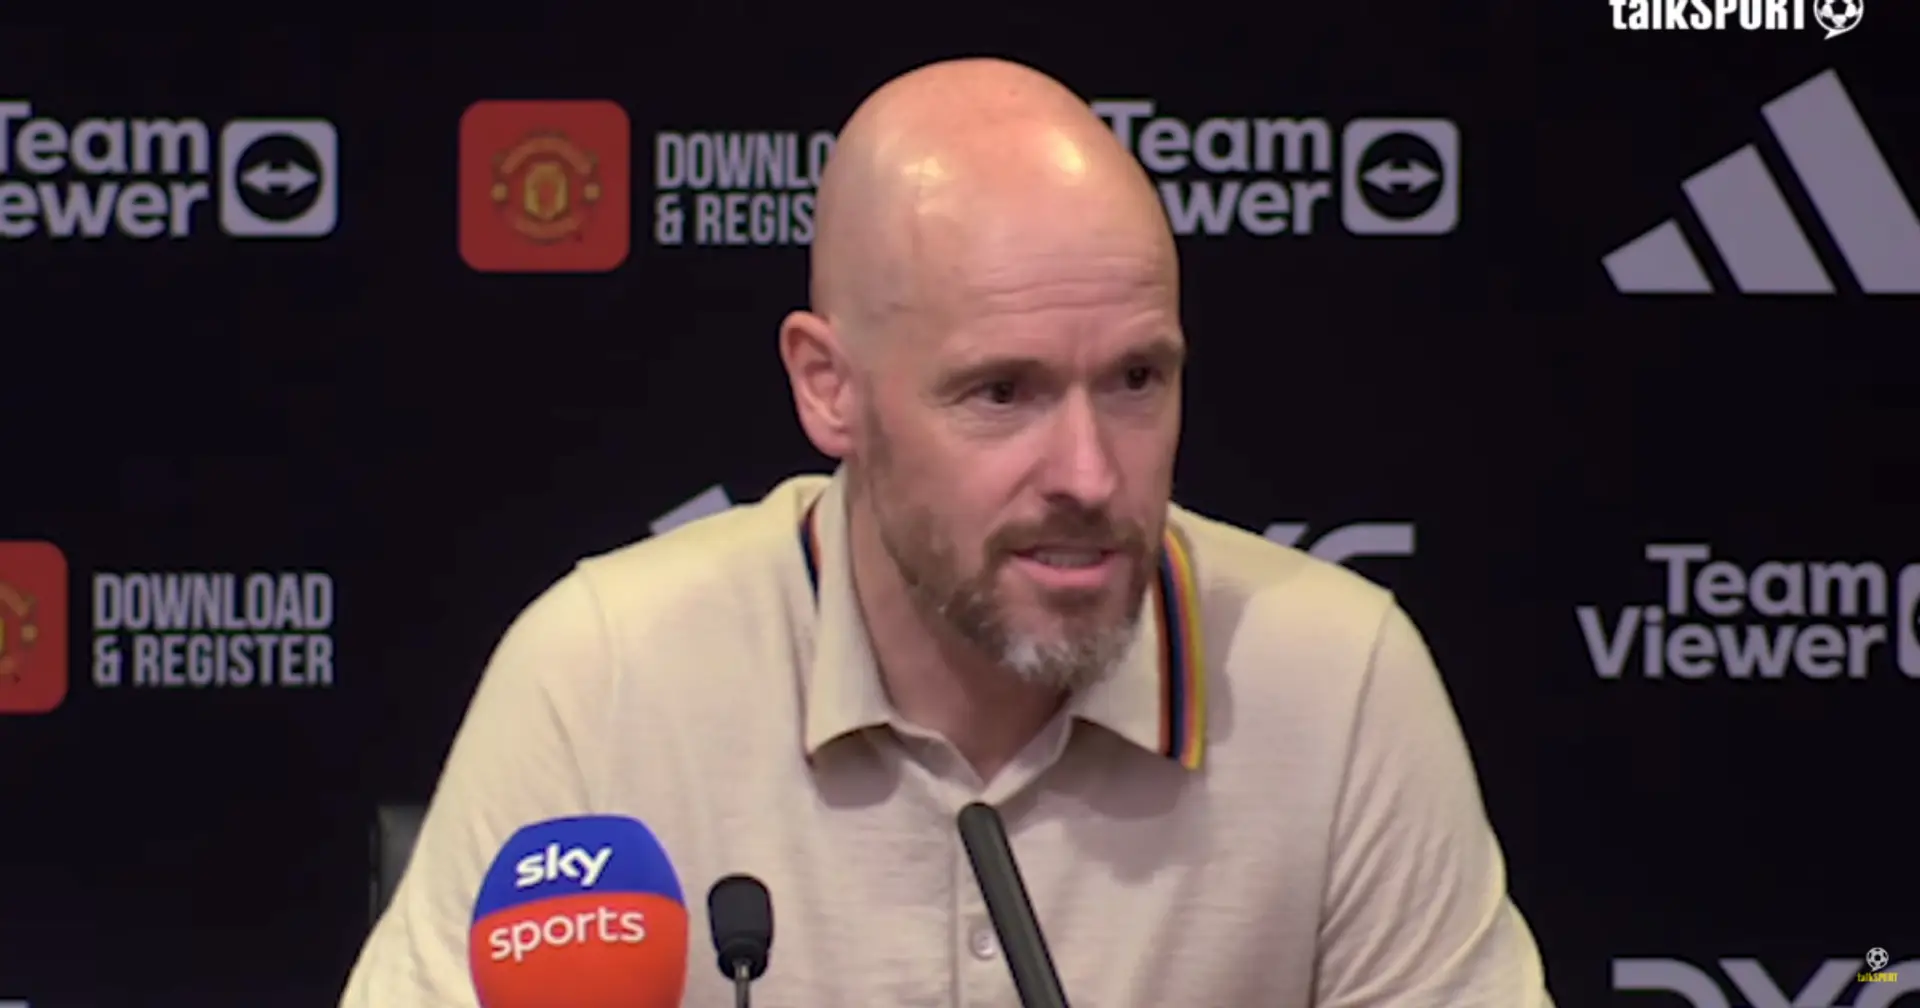 'Pathetic': Ten Hag lashes out at Sky Sports reporter after Arsenal defeat